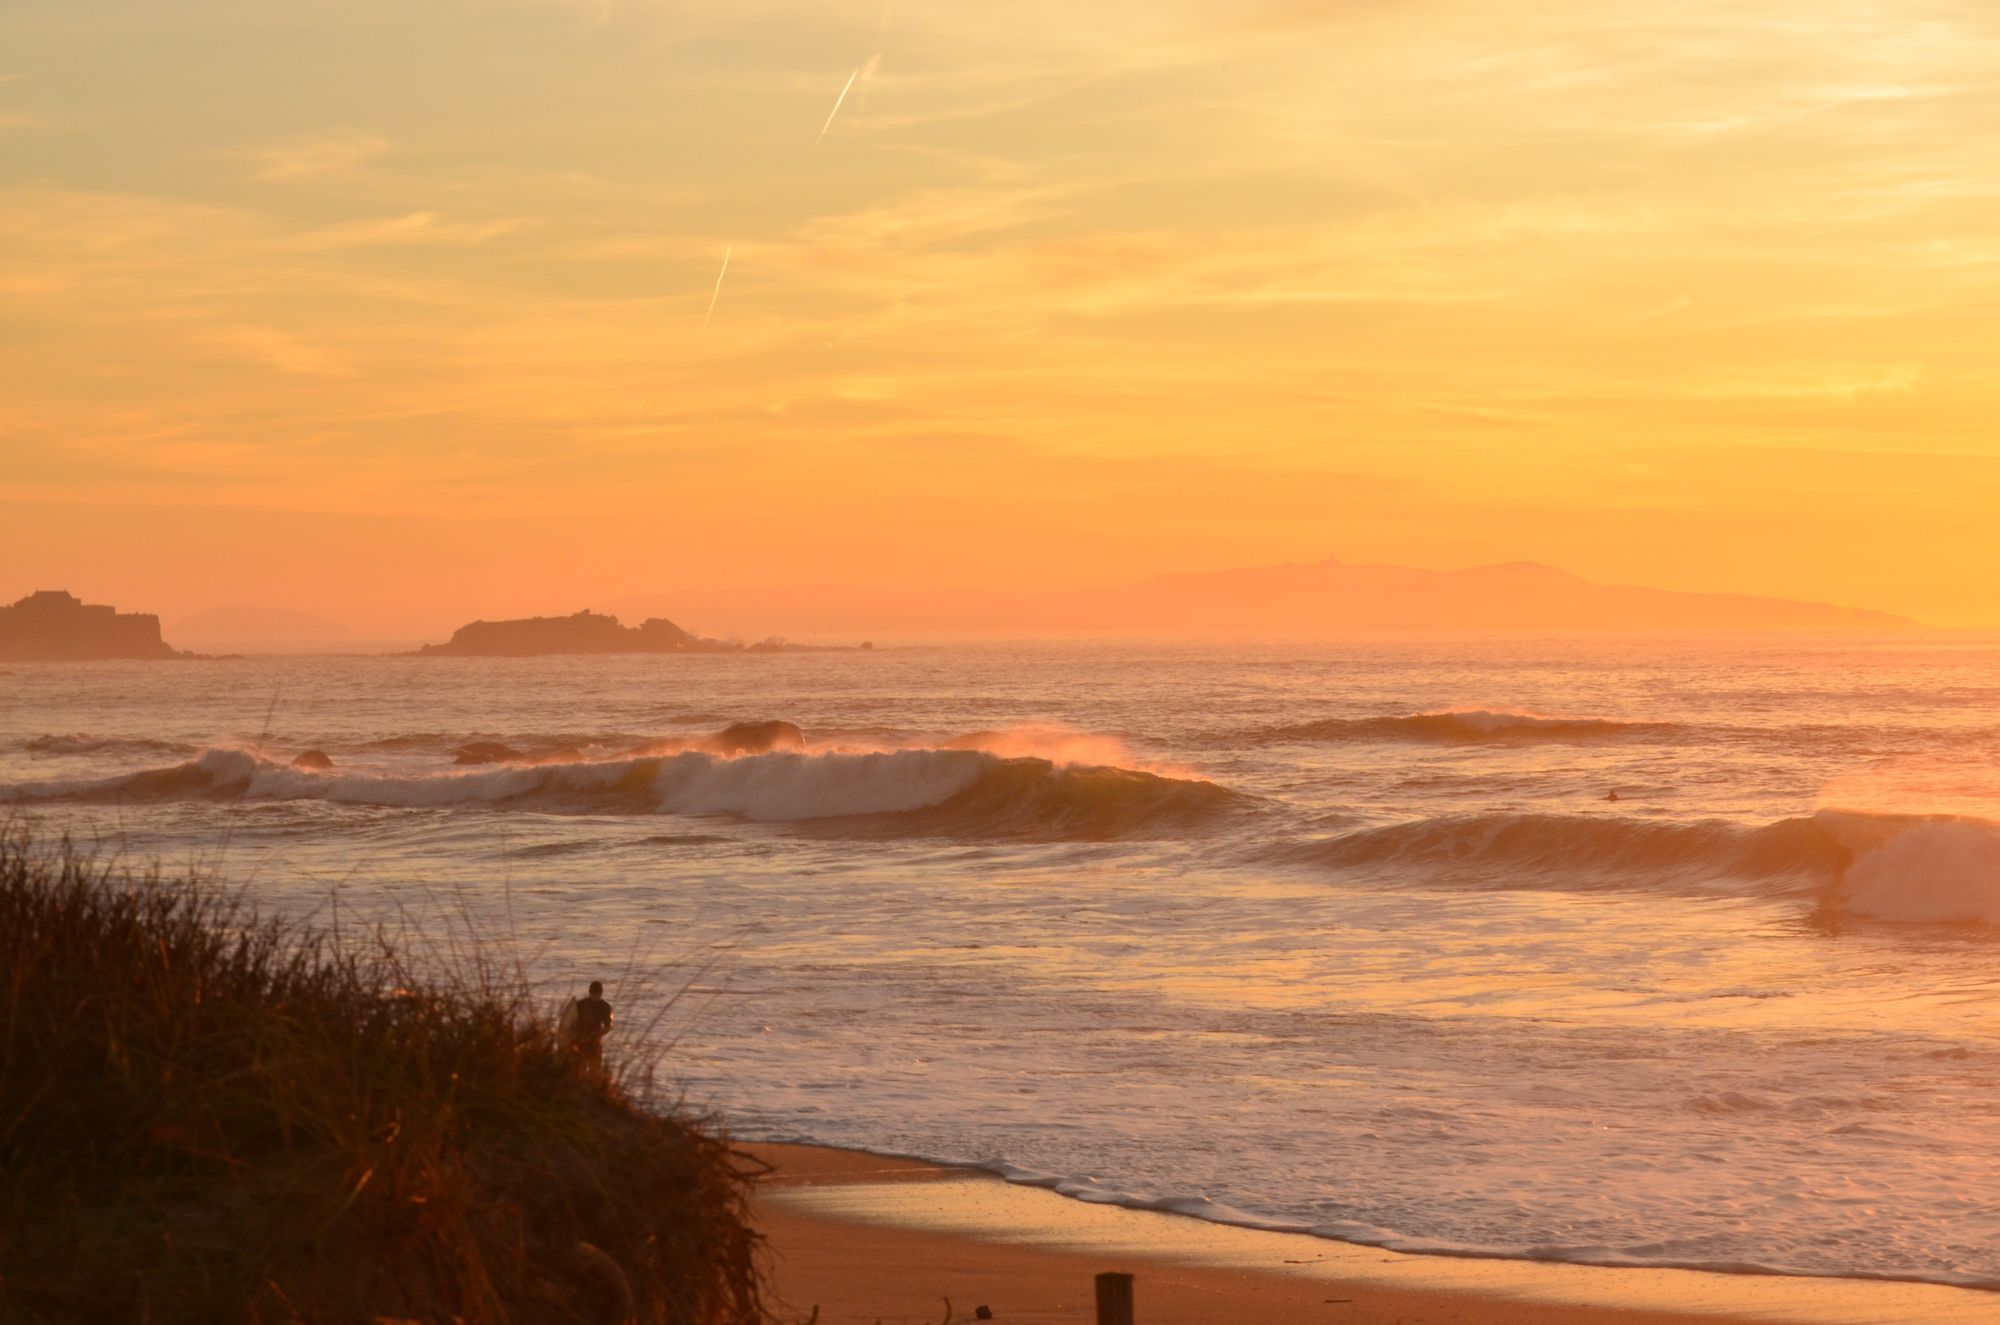 A beautiful sunset at a surf spot in Galicia, Spain